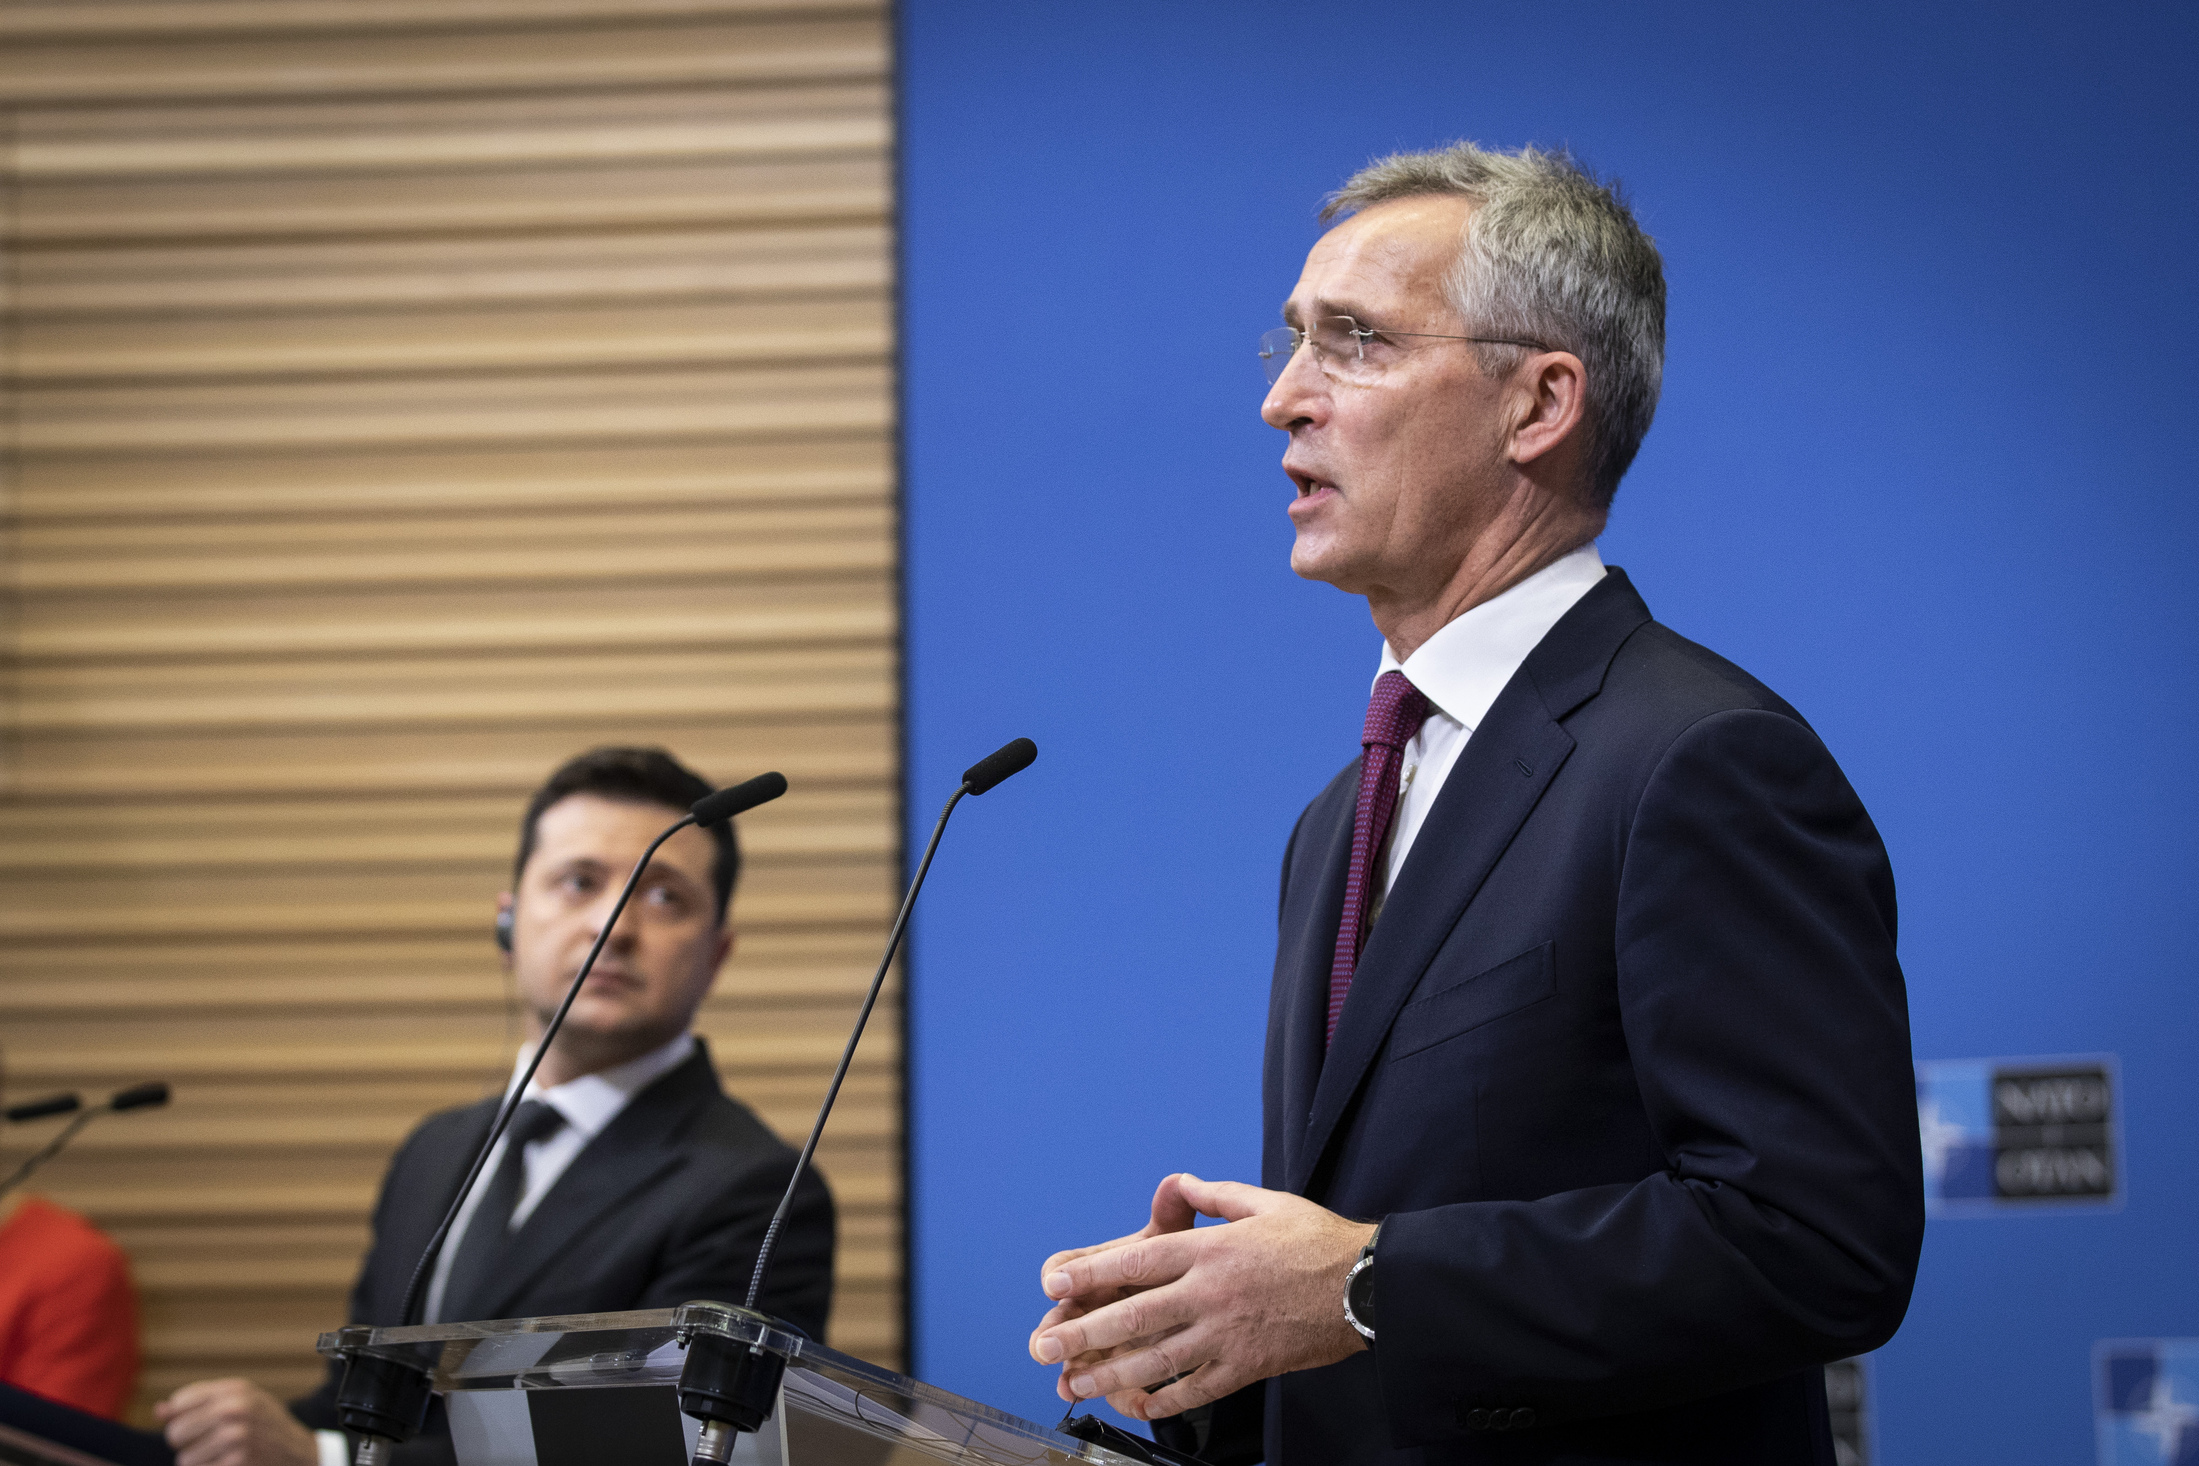 NATO chief Stoltenberg calls for summit with Russia in early 2022